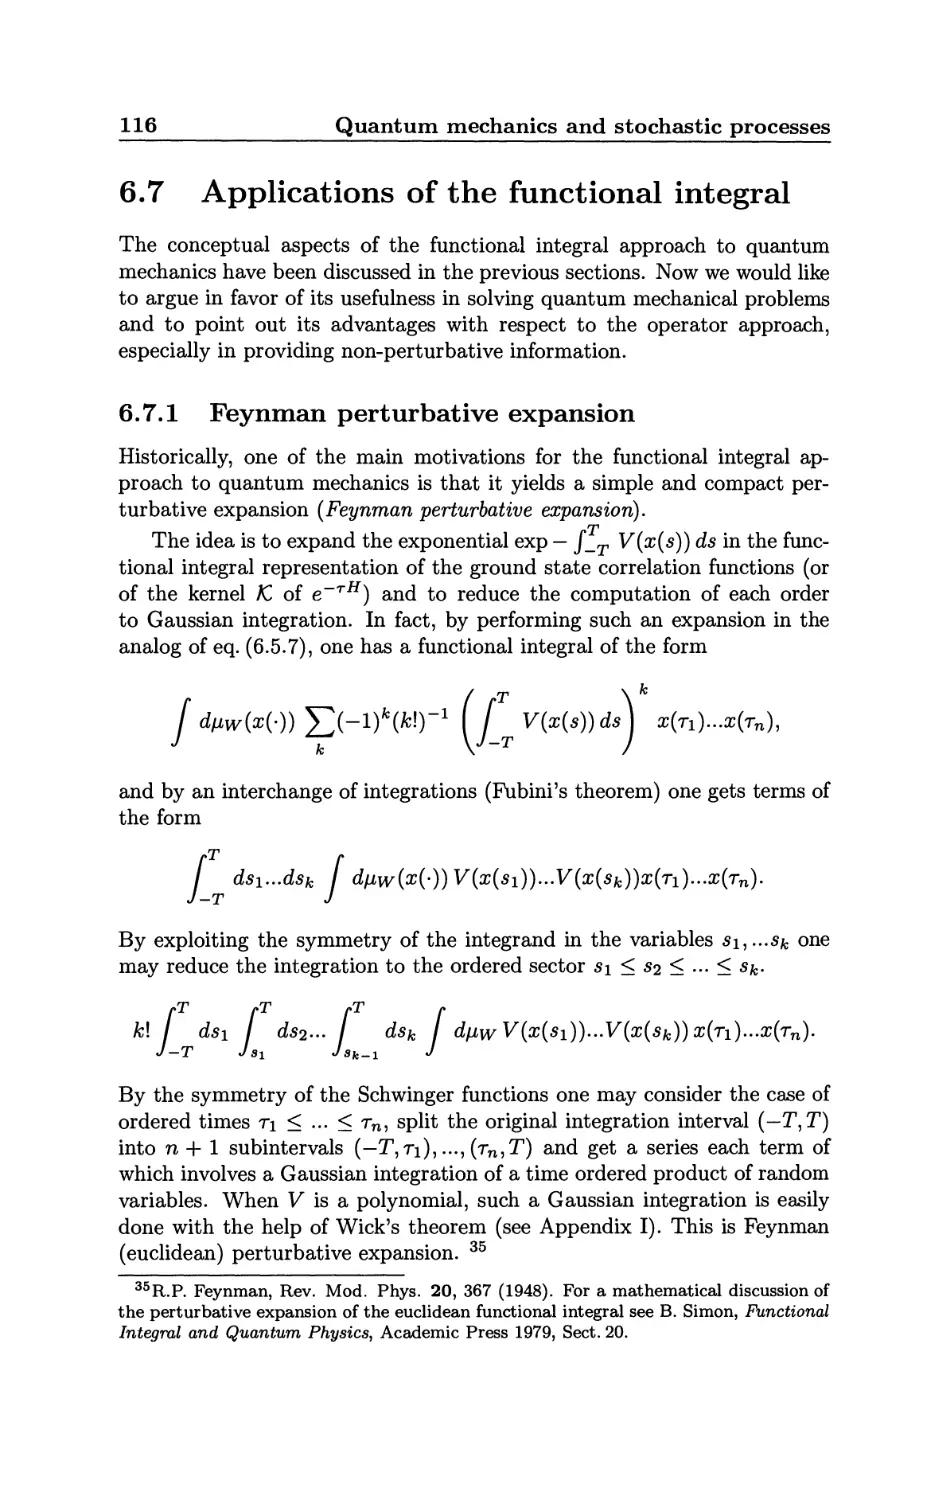 6.7 Applications of the functional integral
6.7.1 Feynman perturbative expansion